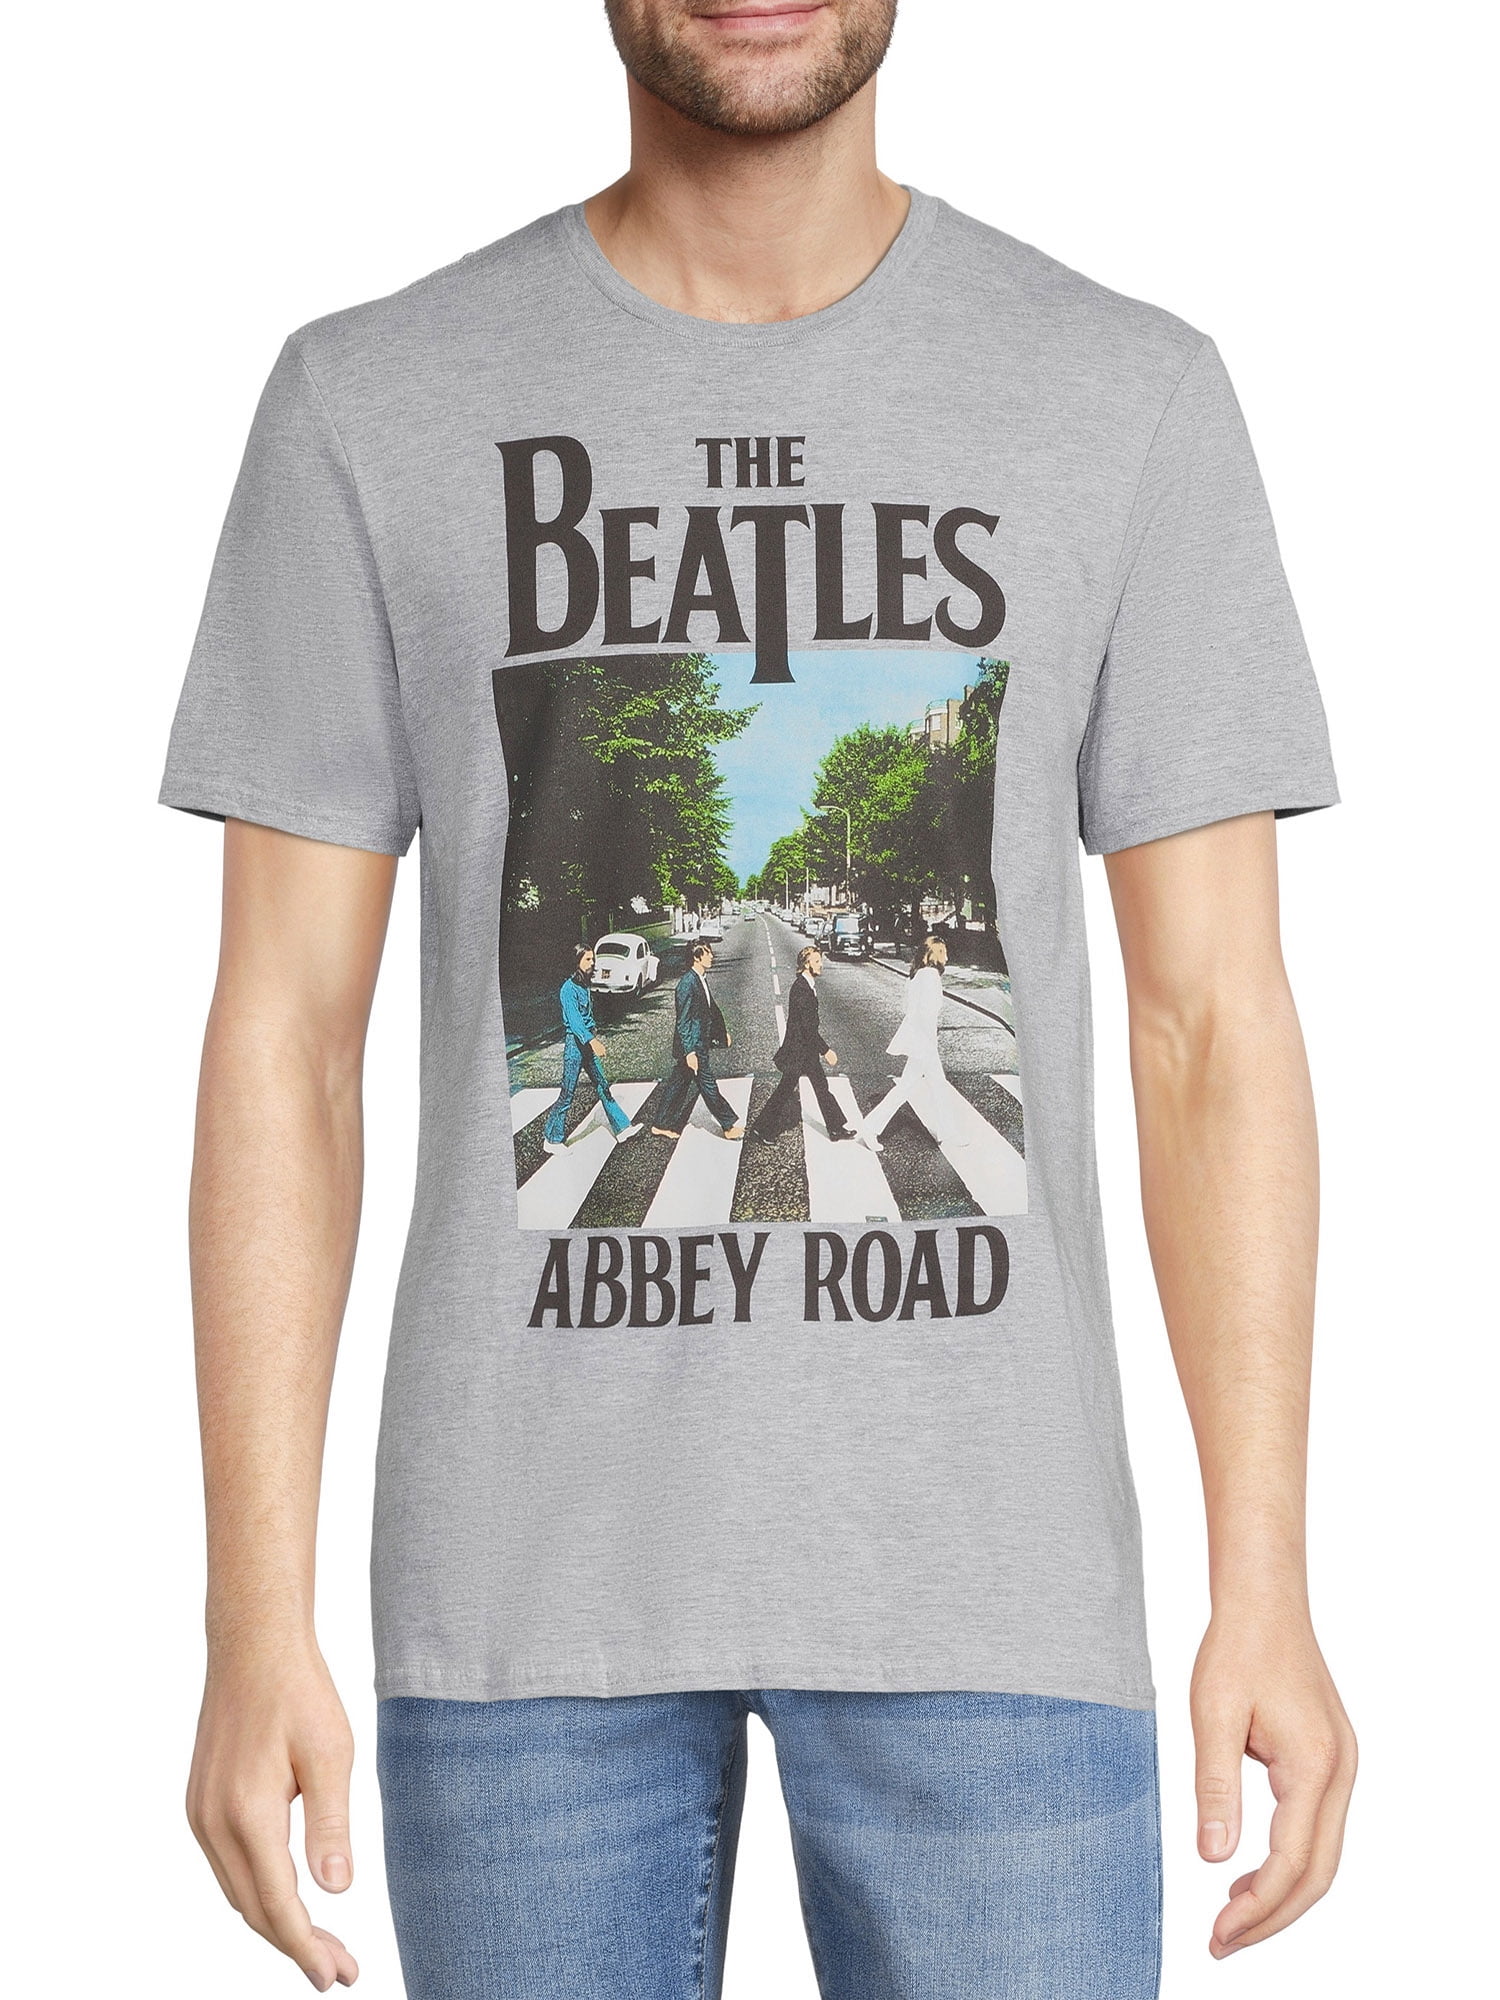 The Beatles Men's Abbey Road Graphic T-Shirt with Short Sleeves